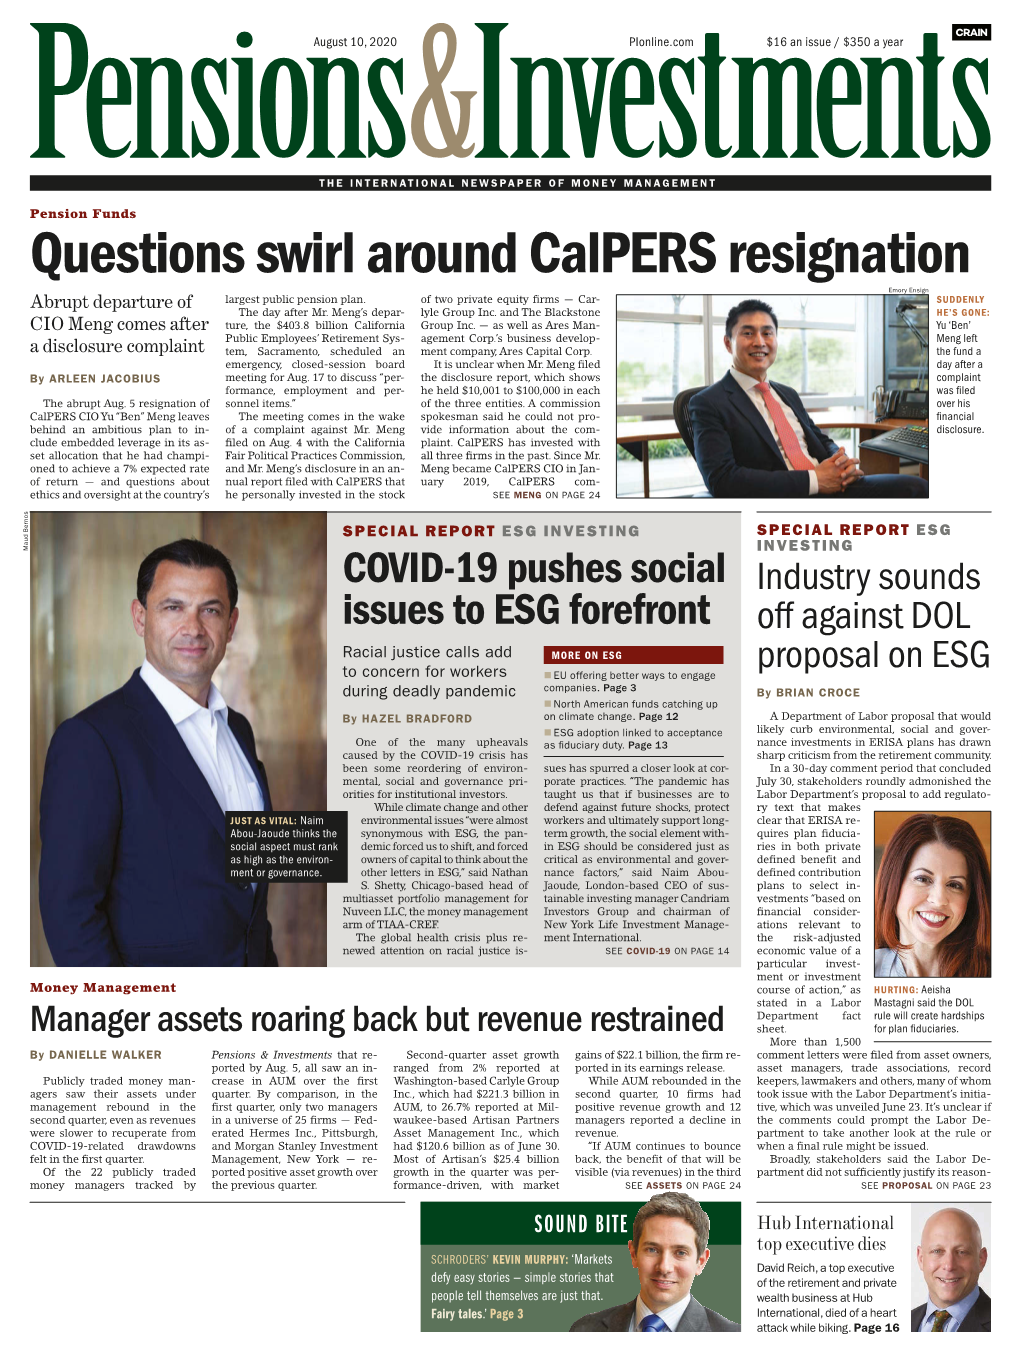 Questions Swirl Around Calpers Resignation Emory Ensign Abrupt Departure of Largest Public Pension Plan